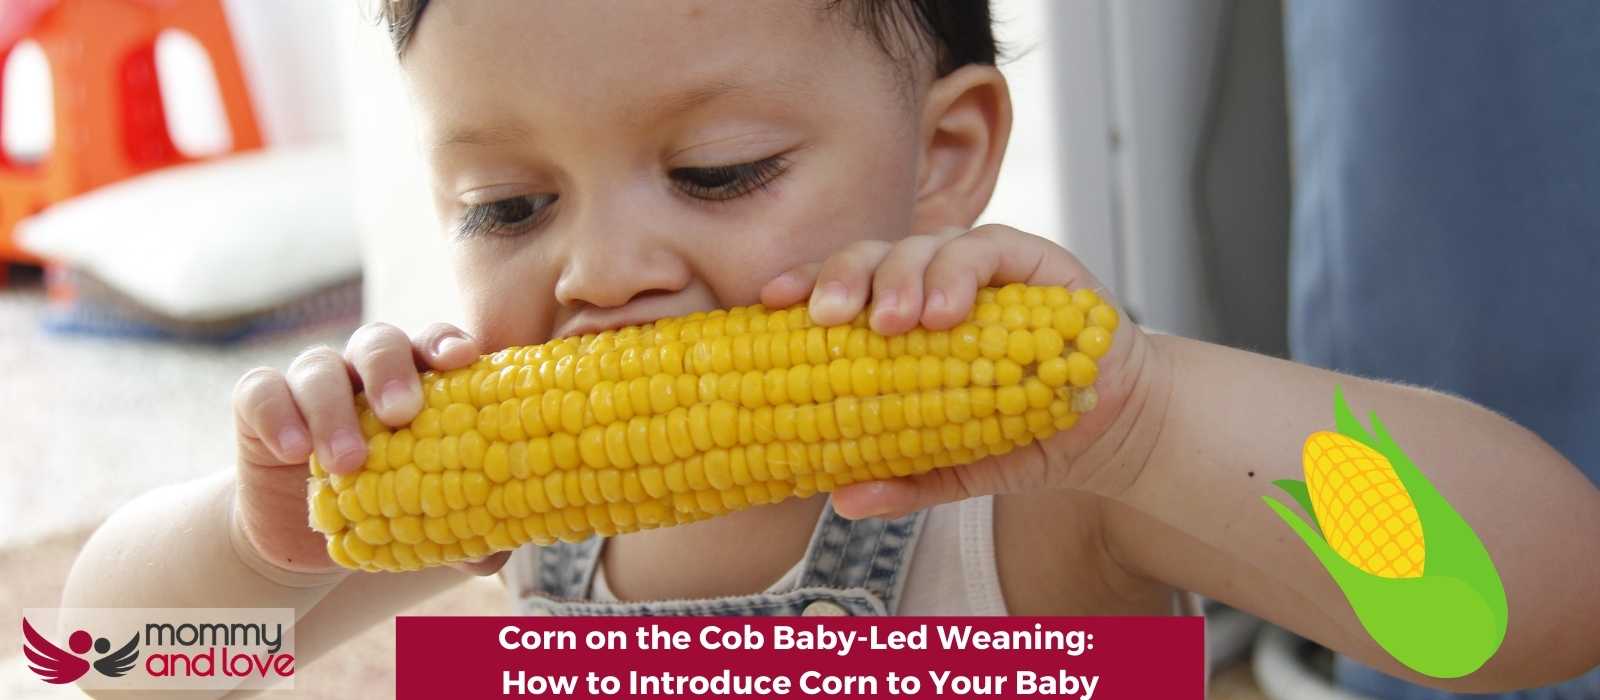 Corn on the Cob Baby-Led Weaning How to Introduce Corn to Your Baby